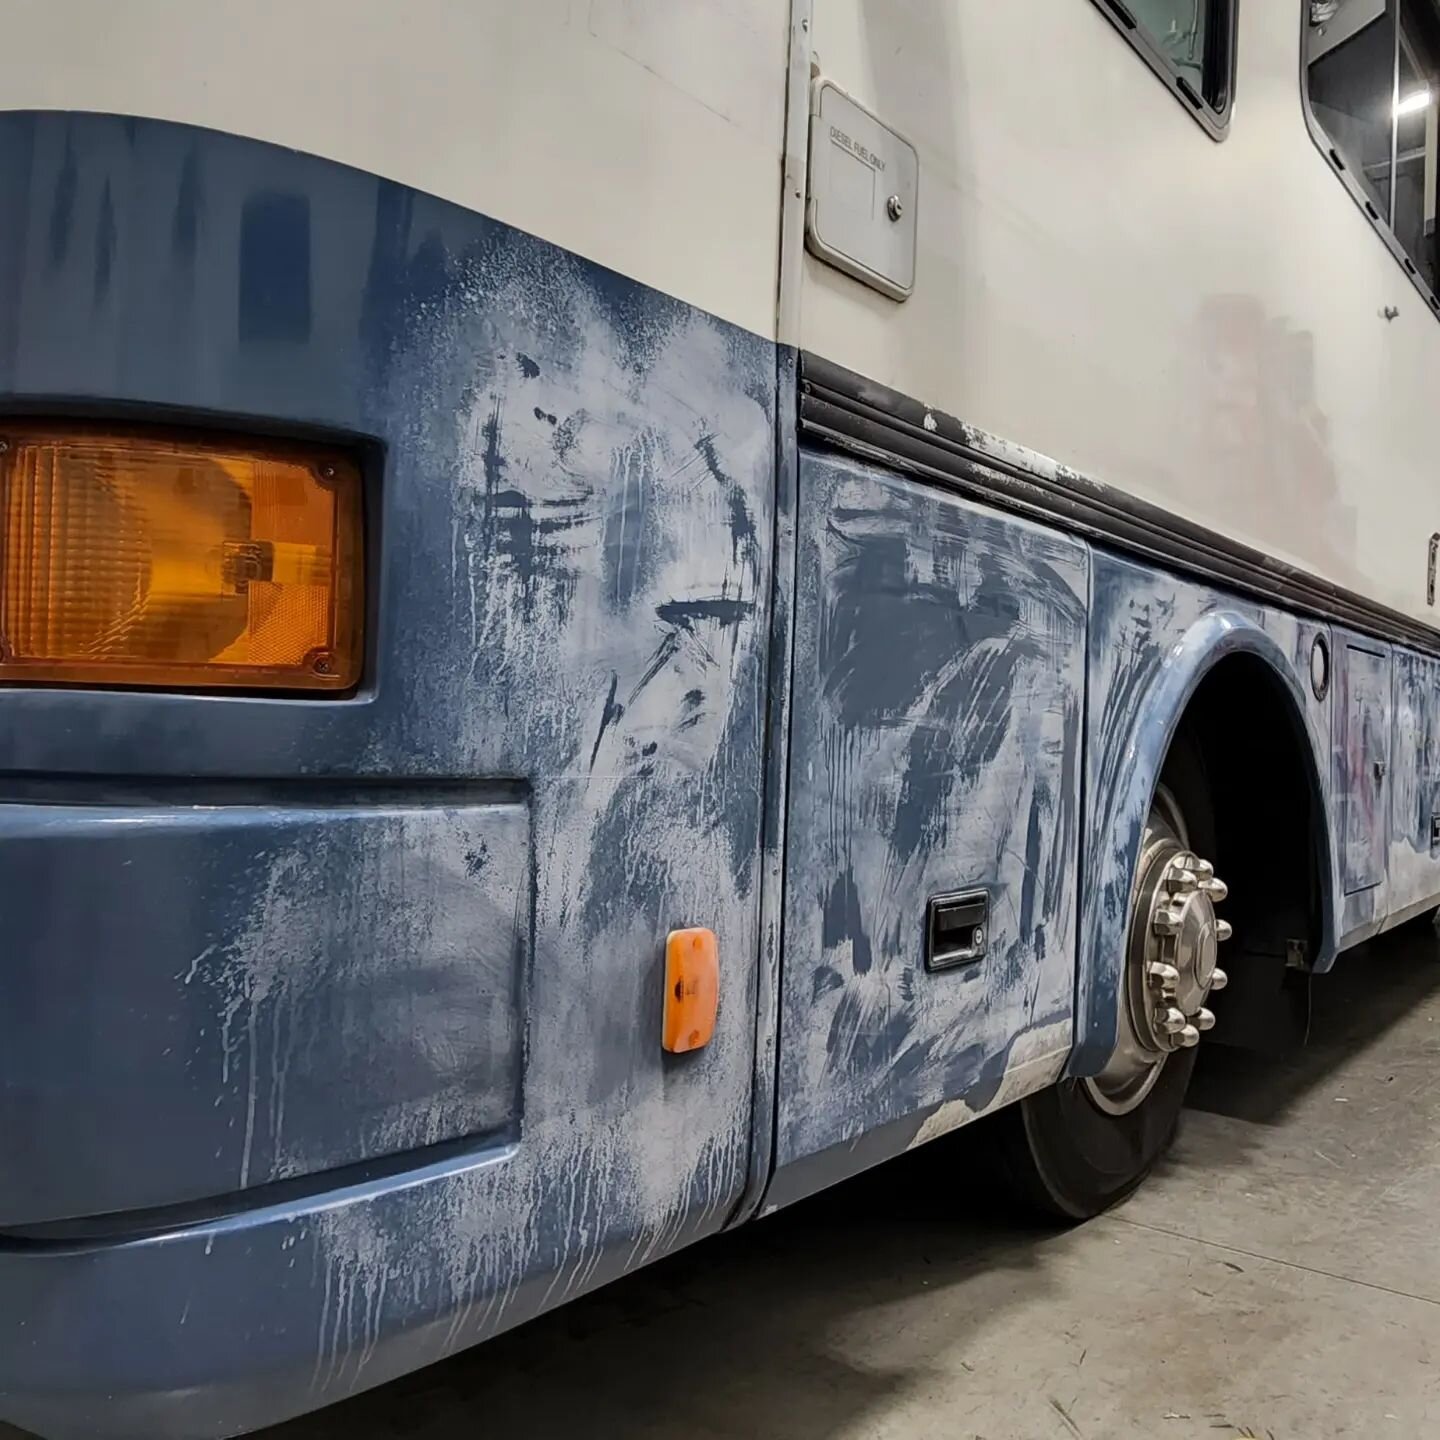 Have an old ride that just needs a face lift? We do custom modernization for older vehicles! 

#rvlifestyle #vinylwrap #beforeandafter